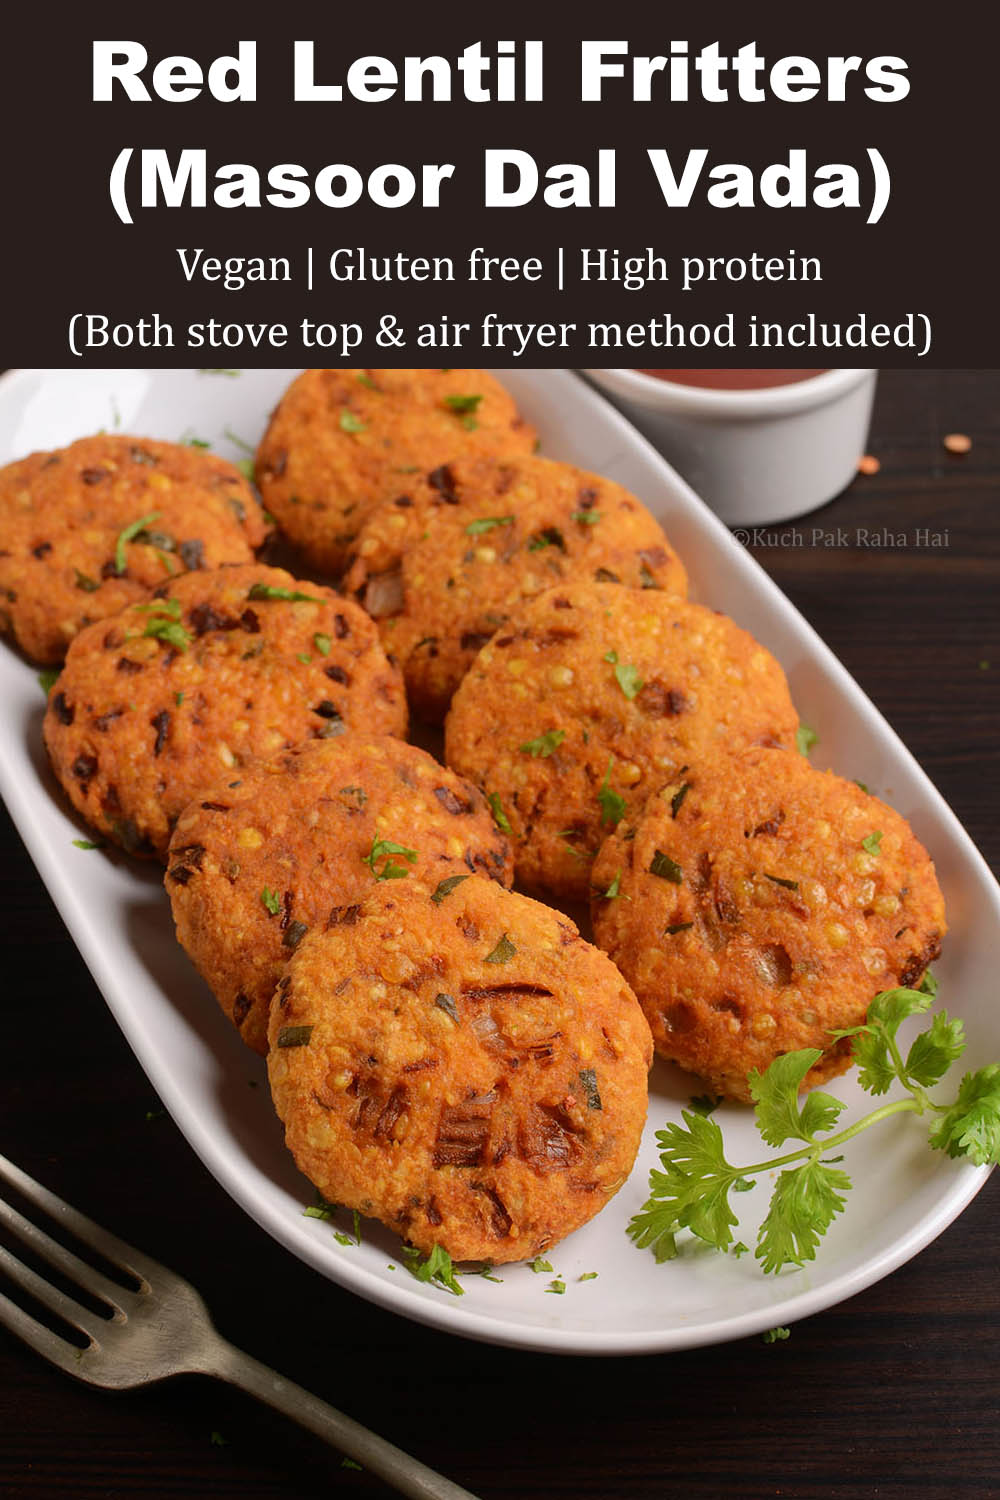 Red lentil fritters (masoor dal vada), deep fried or air fried.